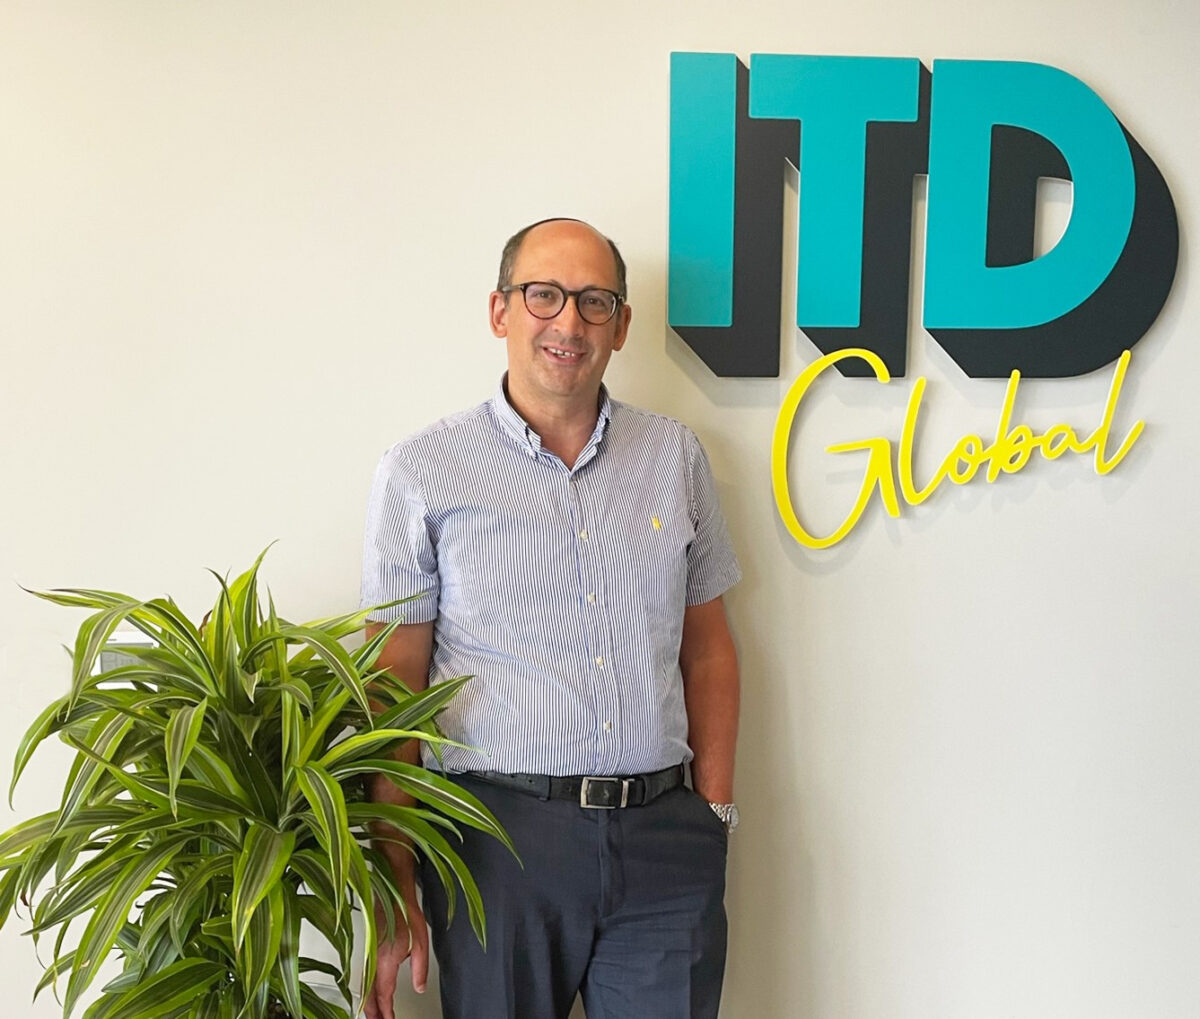 ITD Global secures £15m investment from BGF